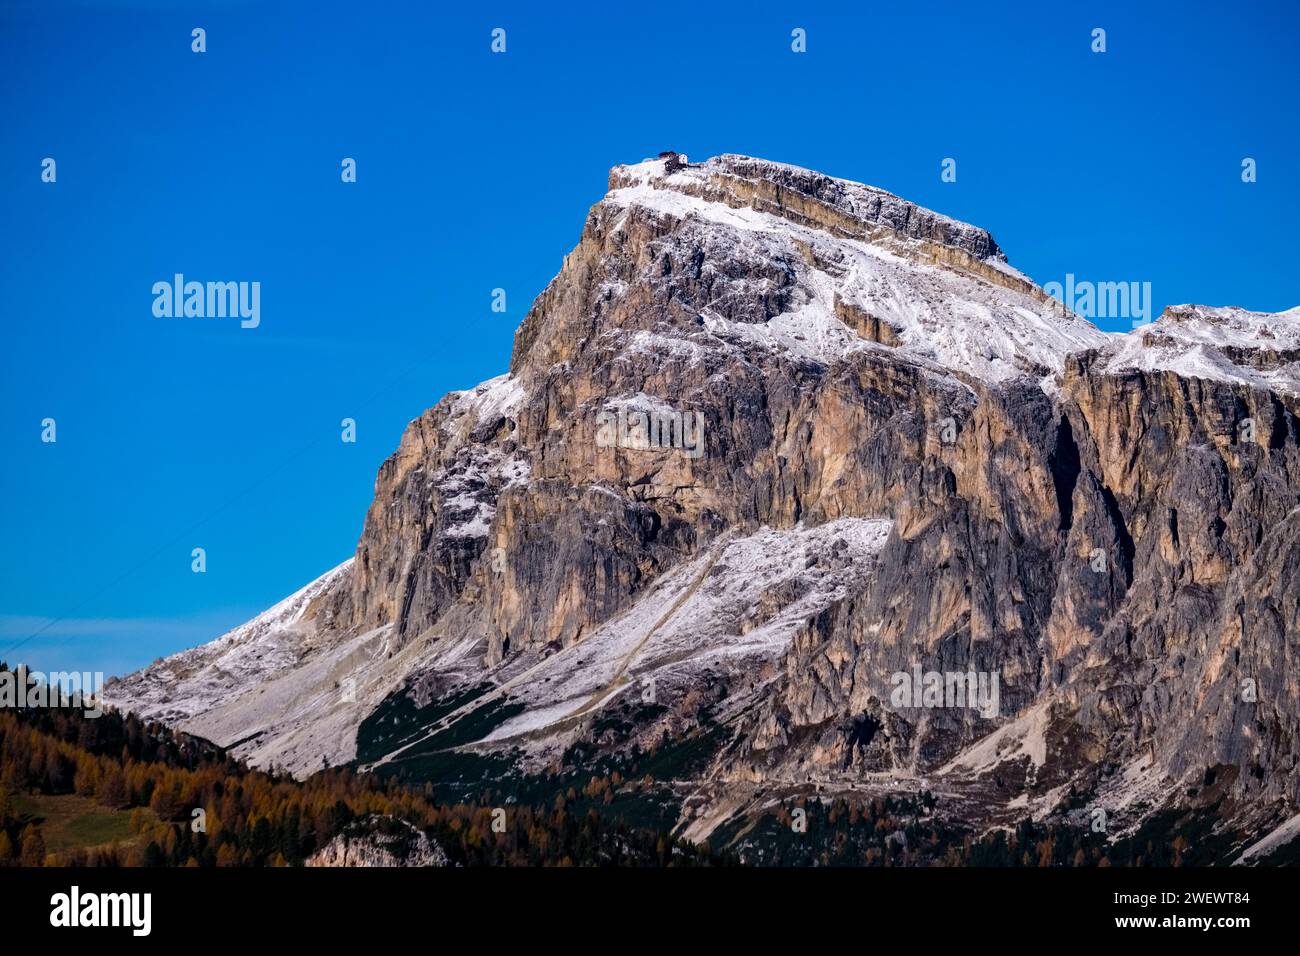 Cliffs and summit of the rock formation Piccolo Lagazuoi, covered with fresh snow in autumn. Stock Photo